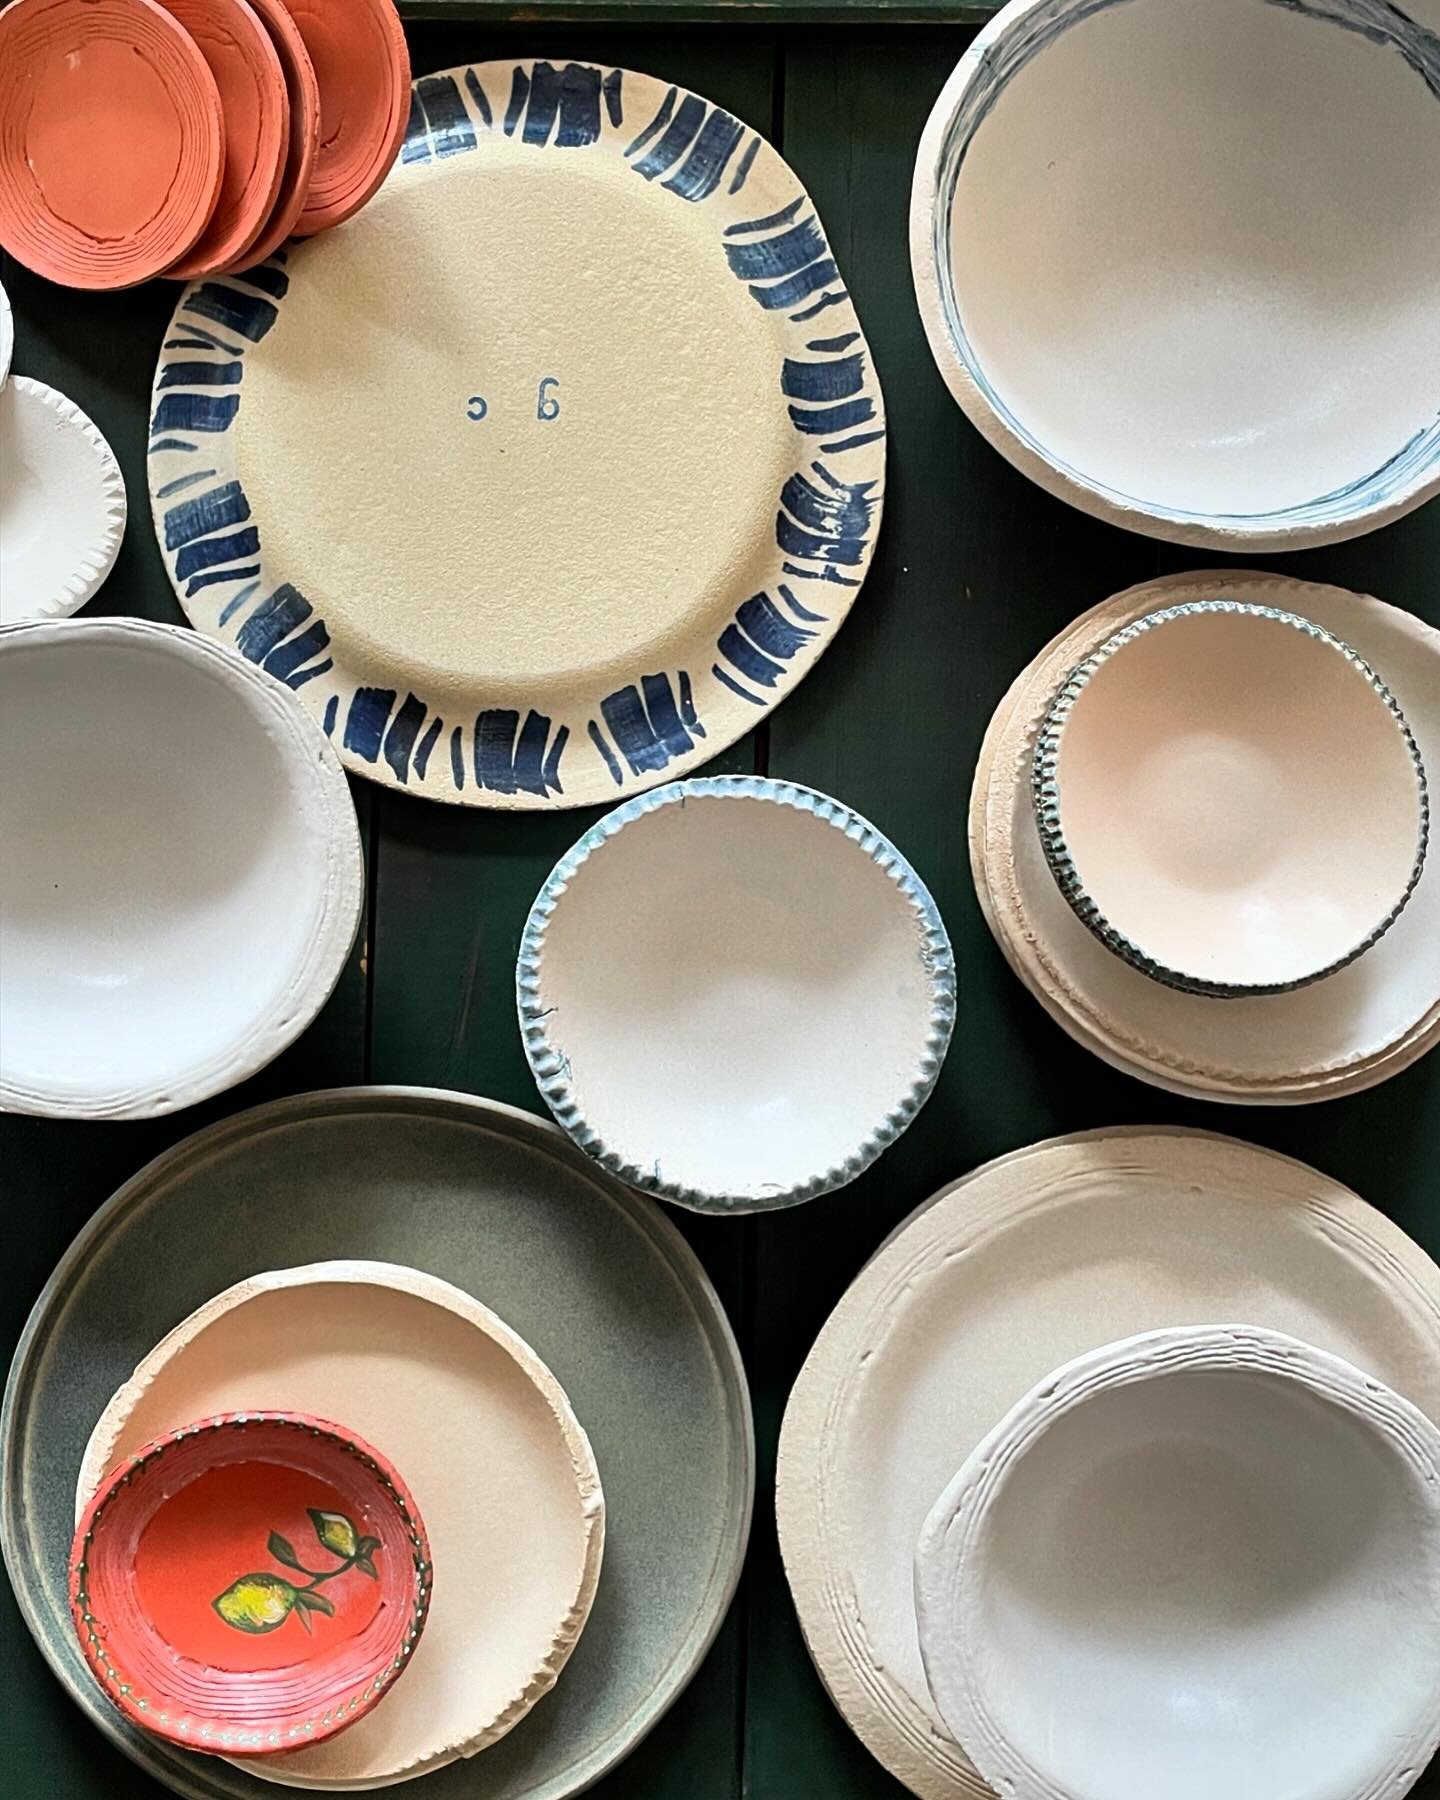 tableware gang all here 👀
that industrial rim is the favorite trash texture piece of the moment, but maybe of all time. Either way, texture tableware is the future. 
Good Connection
Grand Street Collection?
🤓